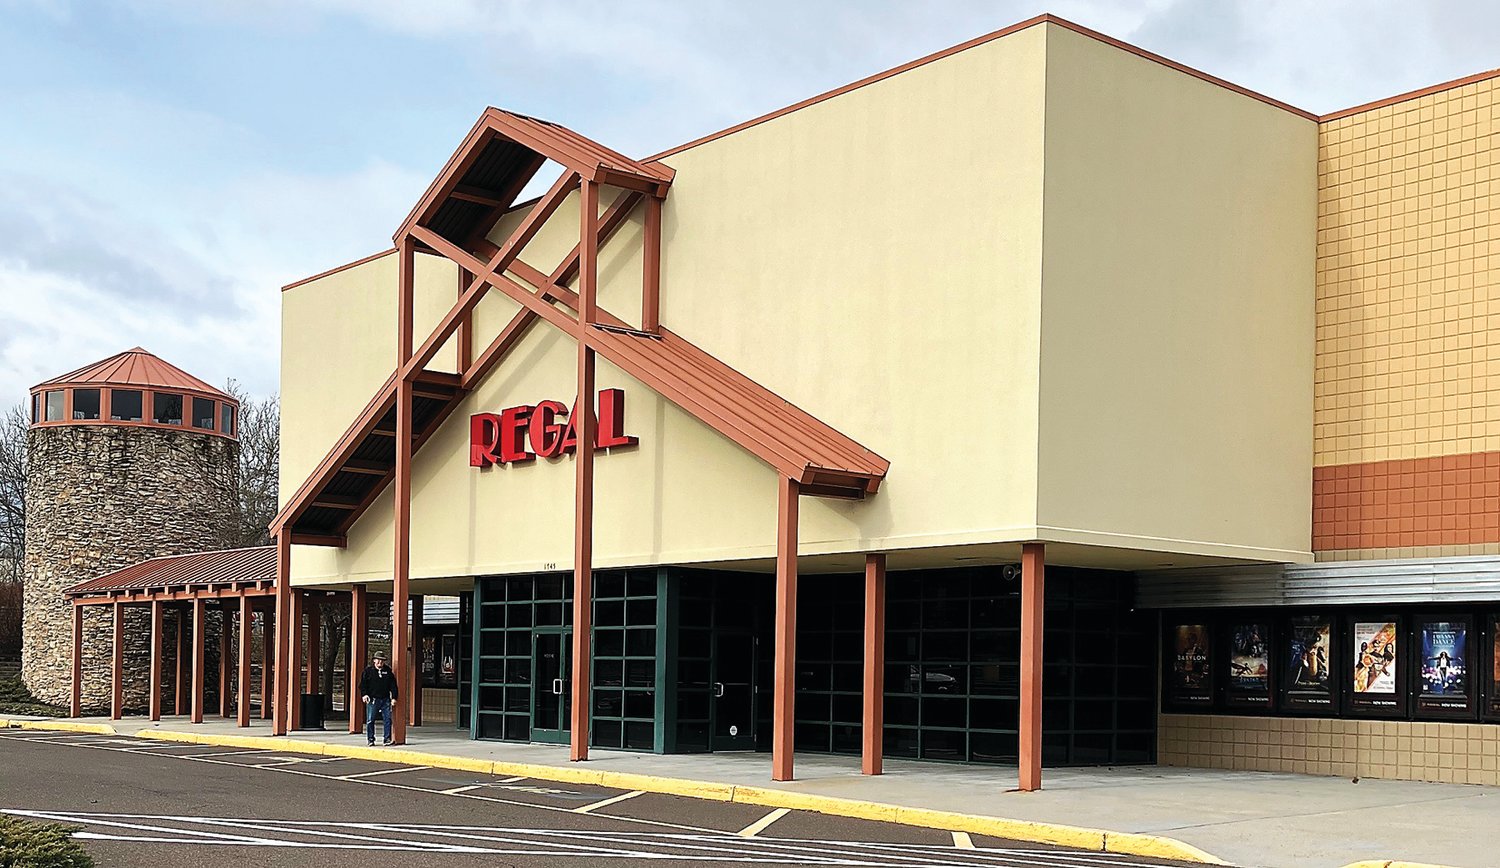 The Regal Barn Plaza 14 movie theater, a longtime staple for Doylestown area moviegoers, is closing.